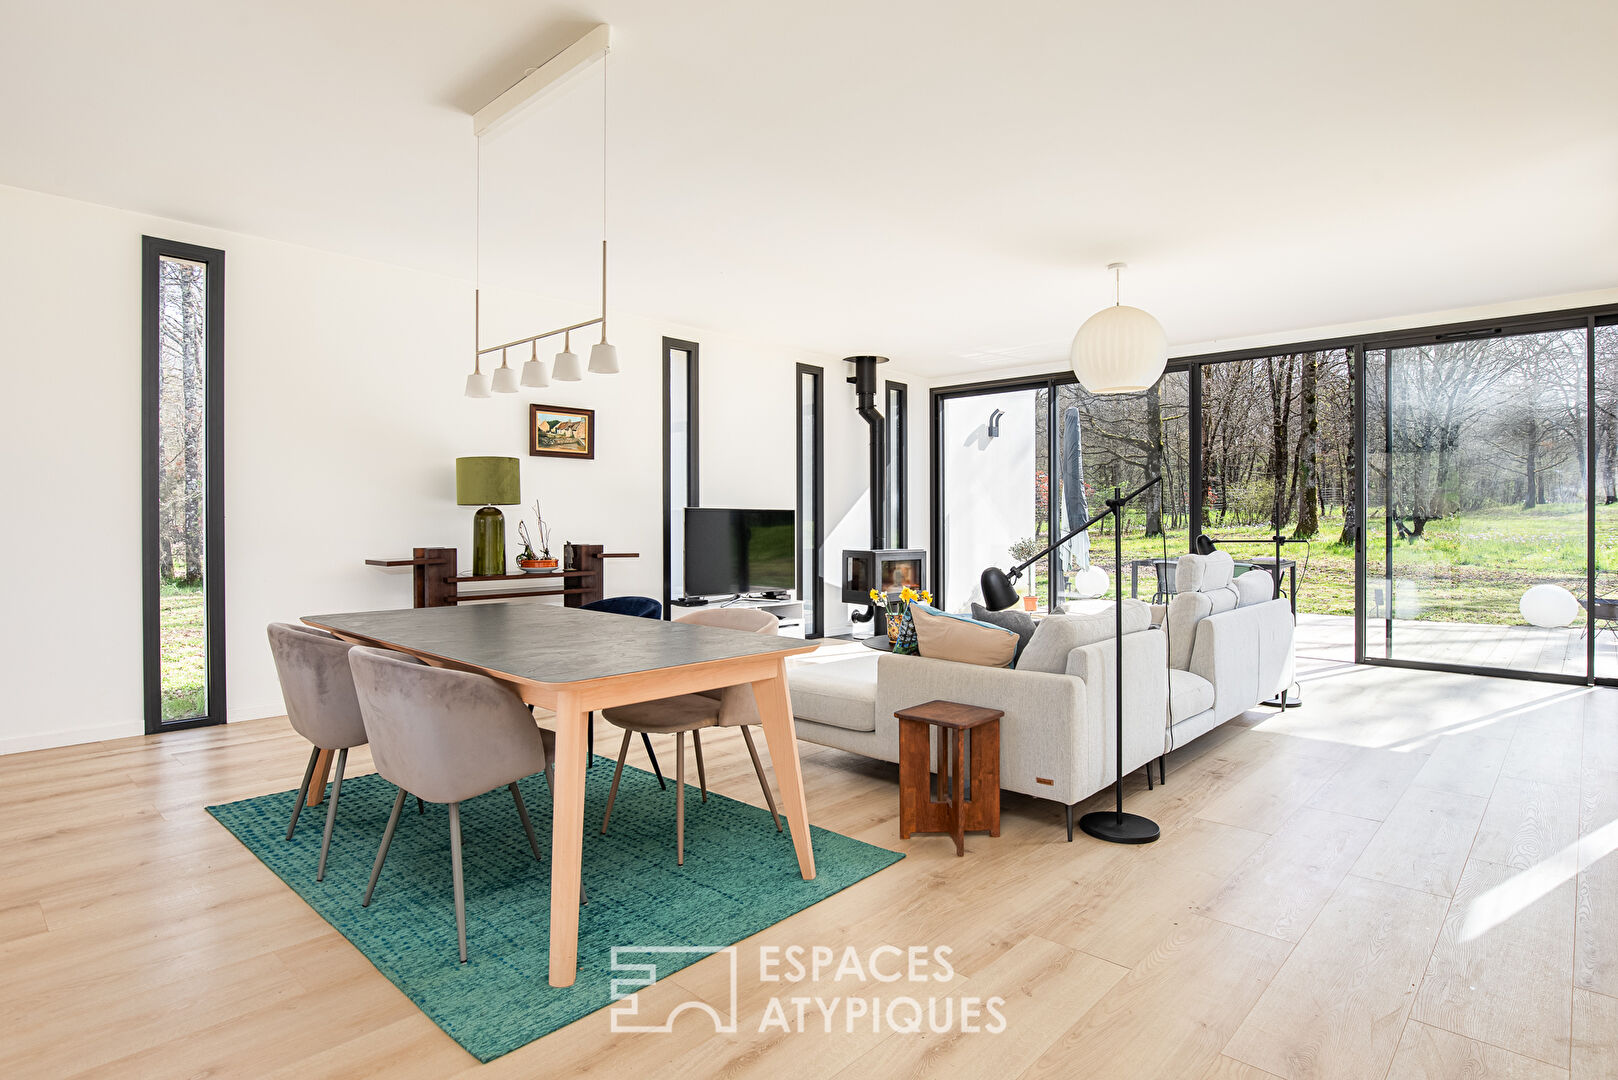 Contemporary single storey in the heart of a wooded environment